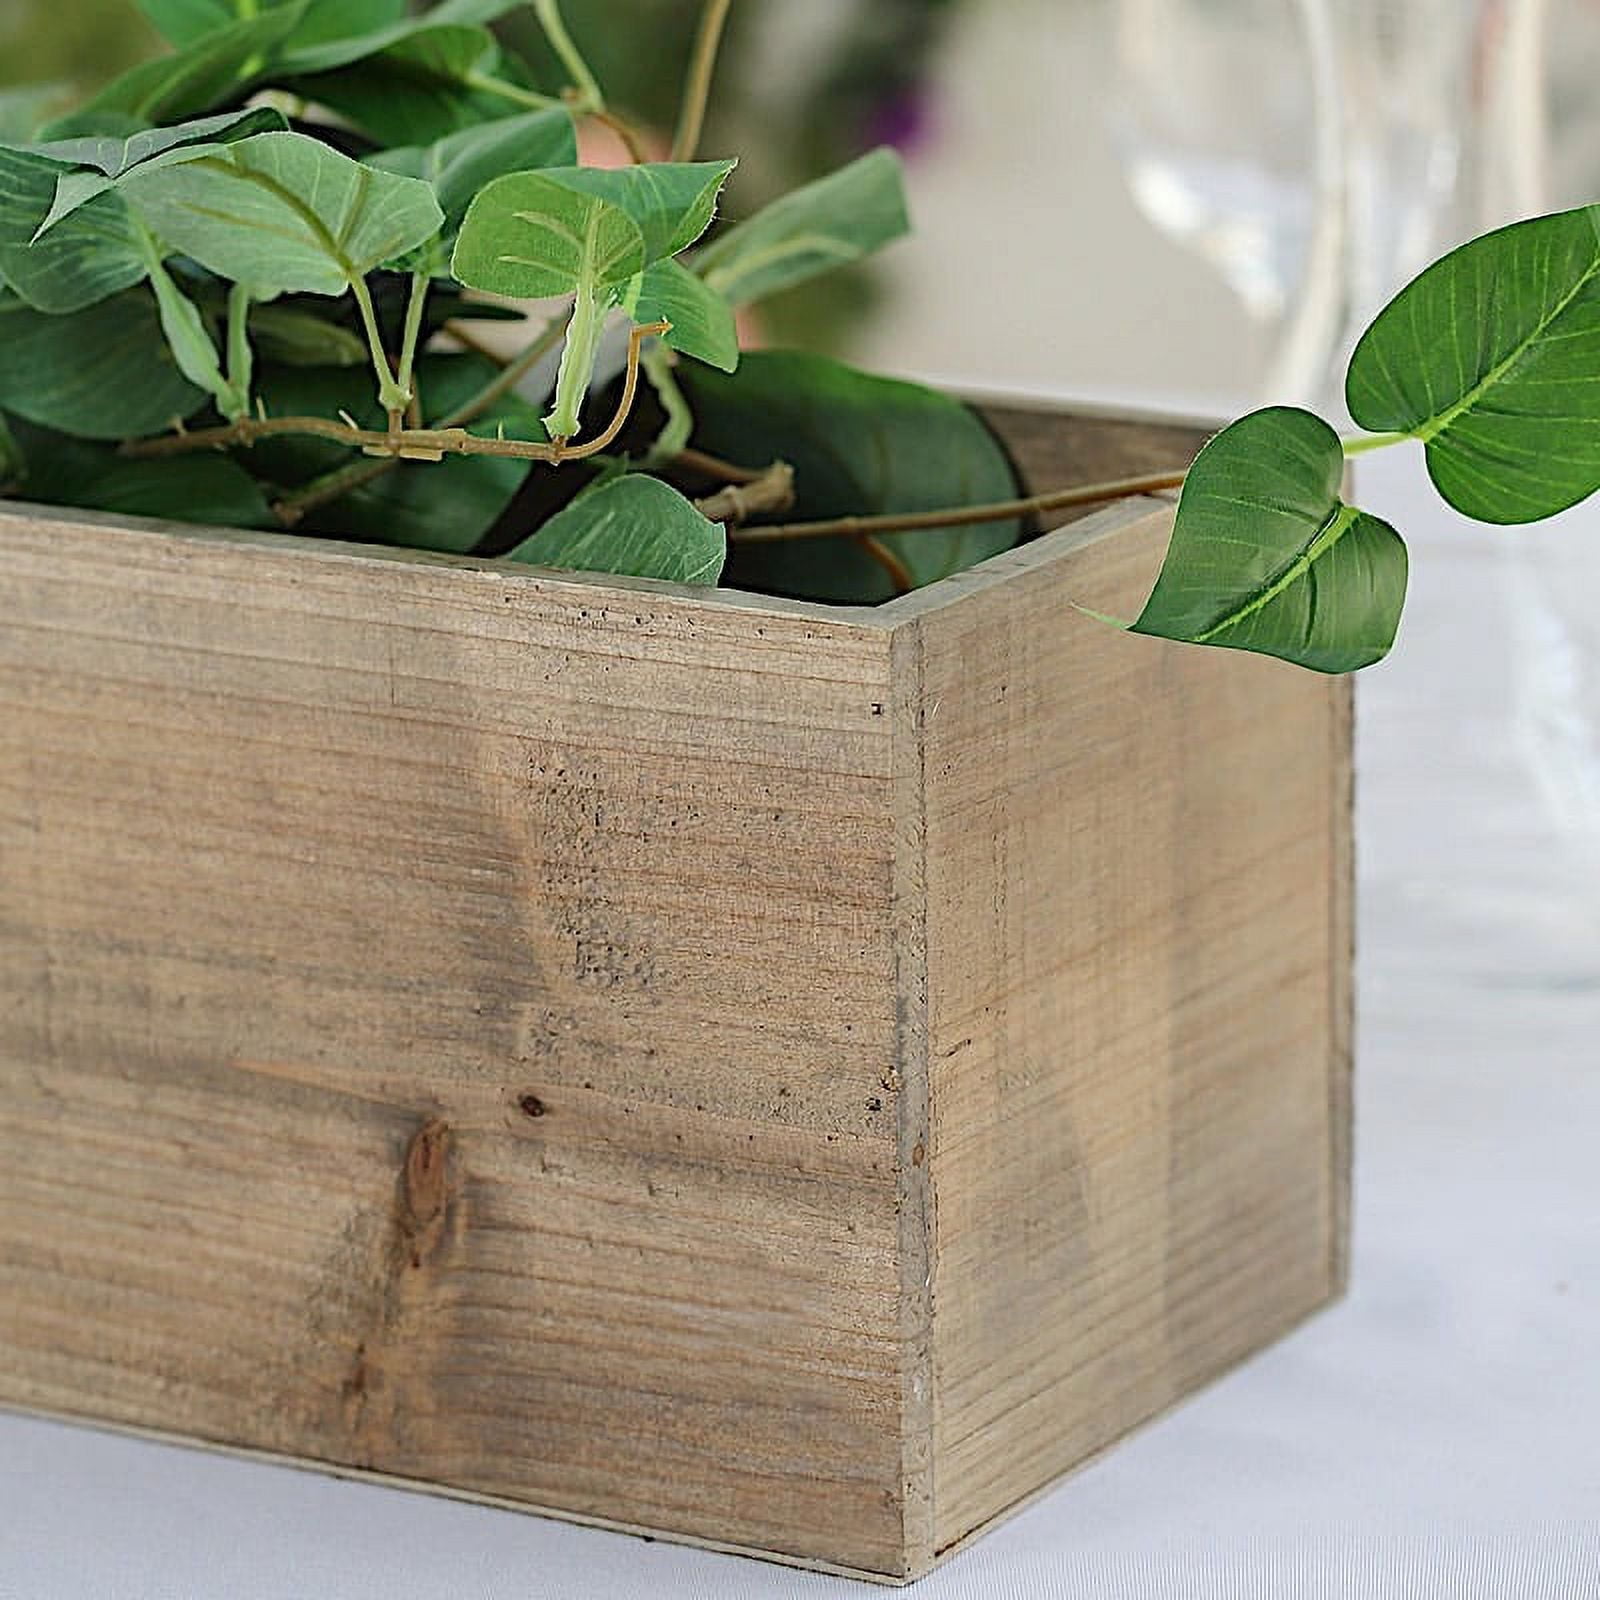 Balsa Circle 2 pcs 5x5-Inch Brown Wood Rustic Square Boxes Planter Holders  Centerpieces - Wedding Party Home Decorations Supplies